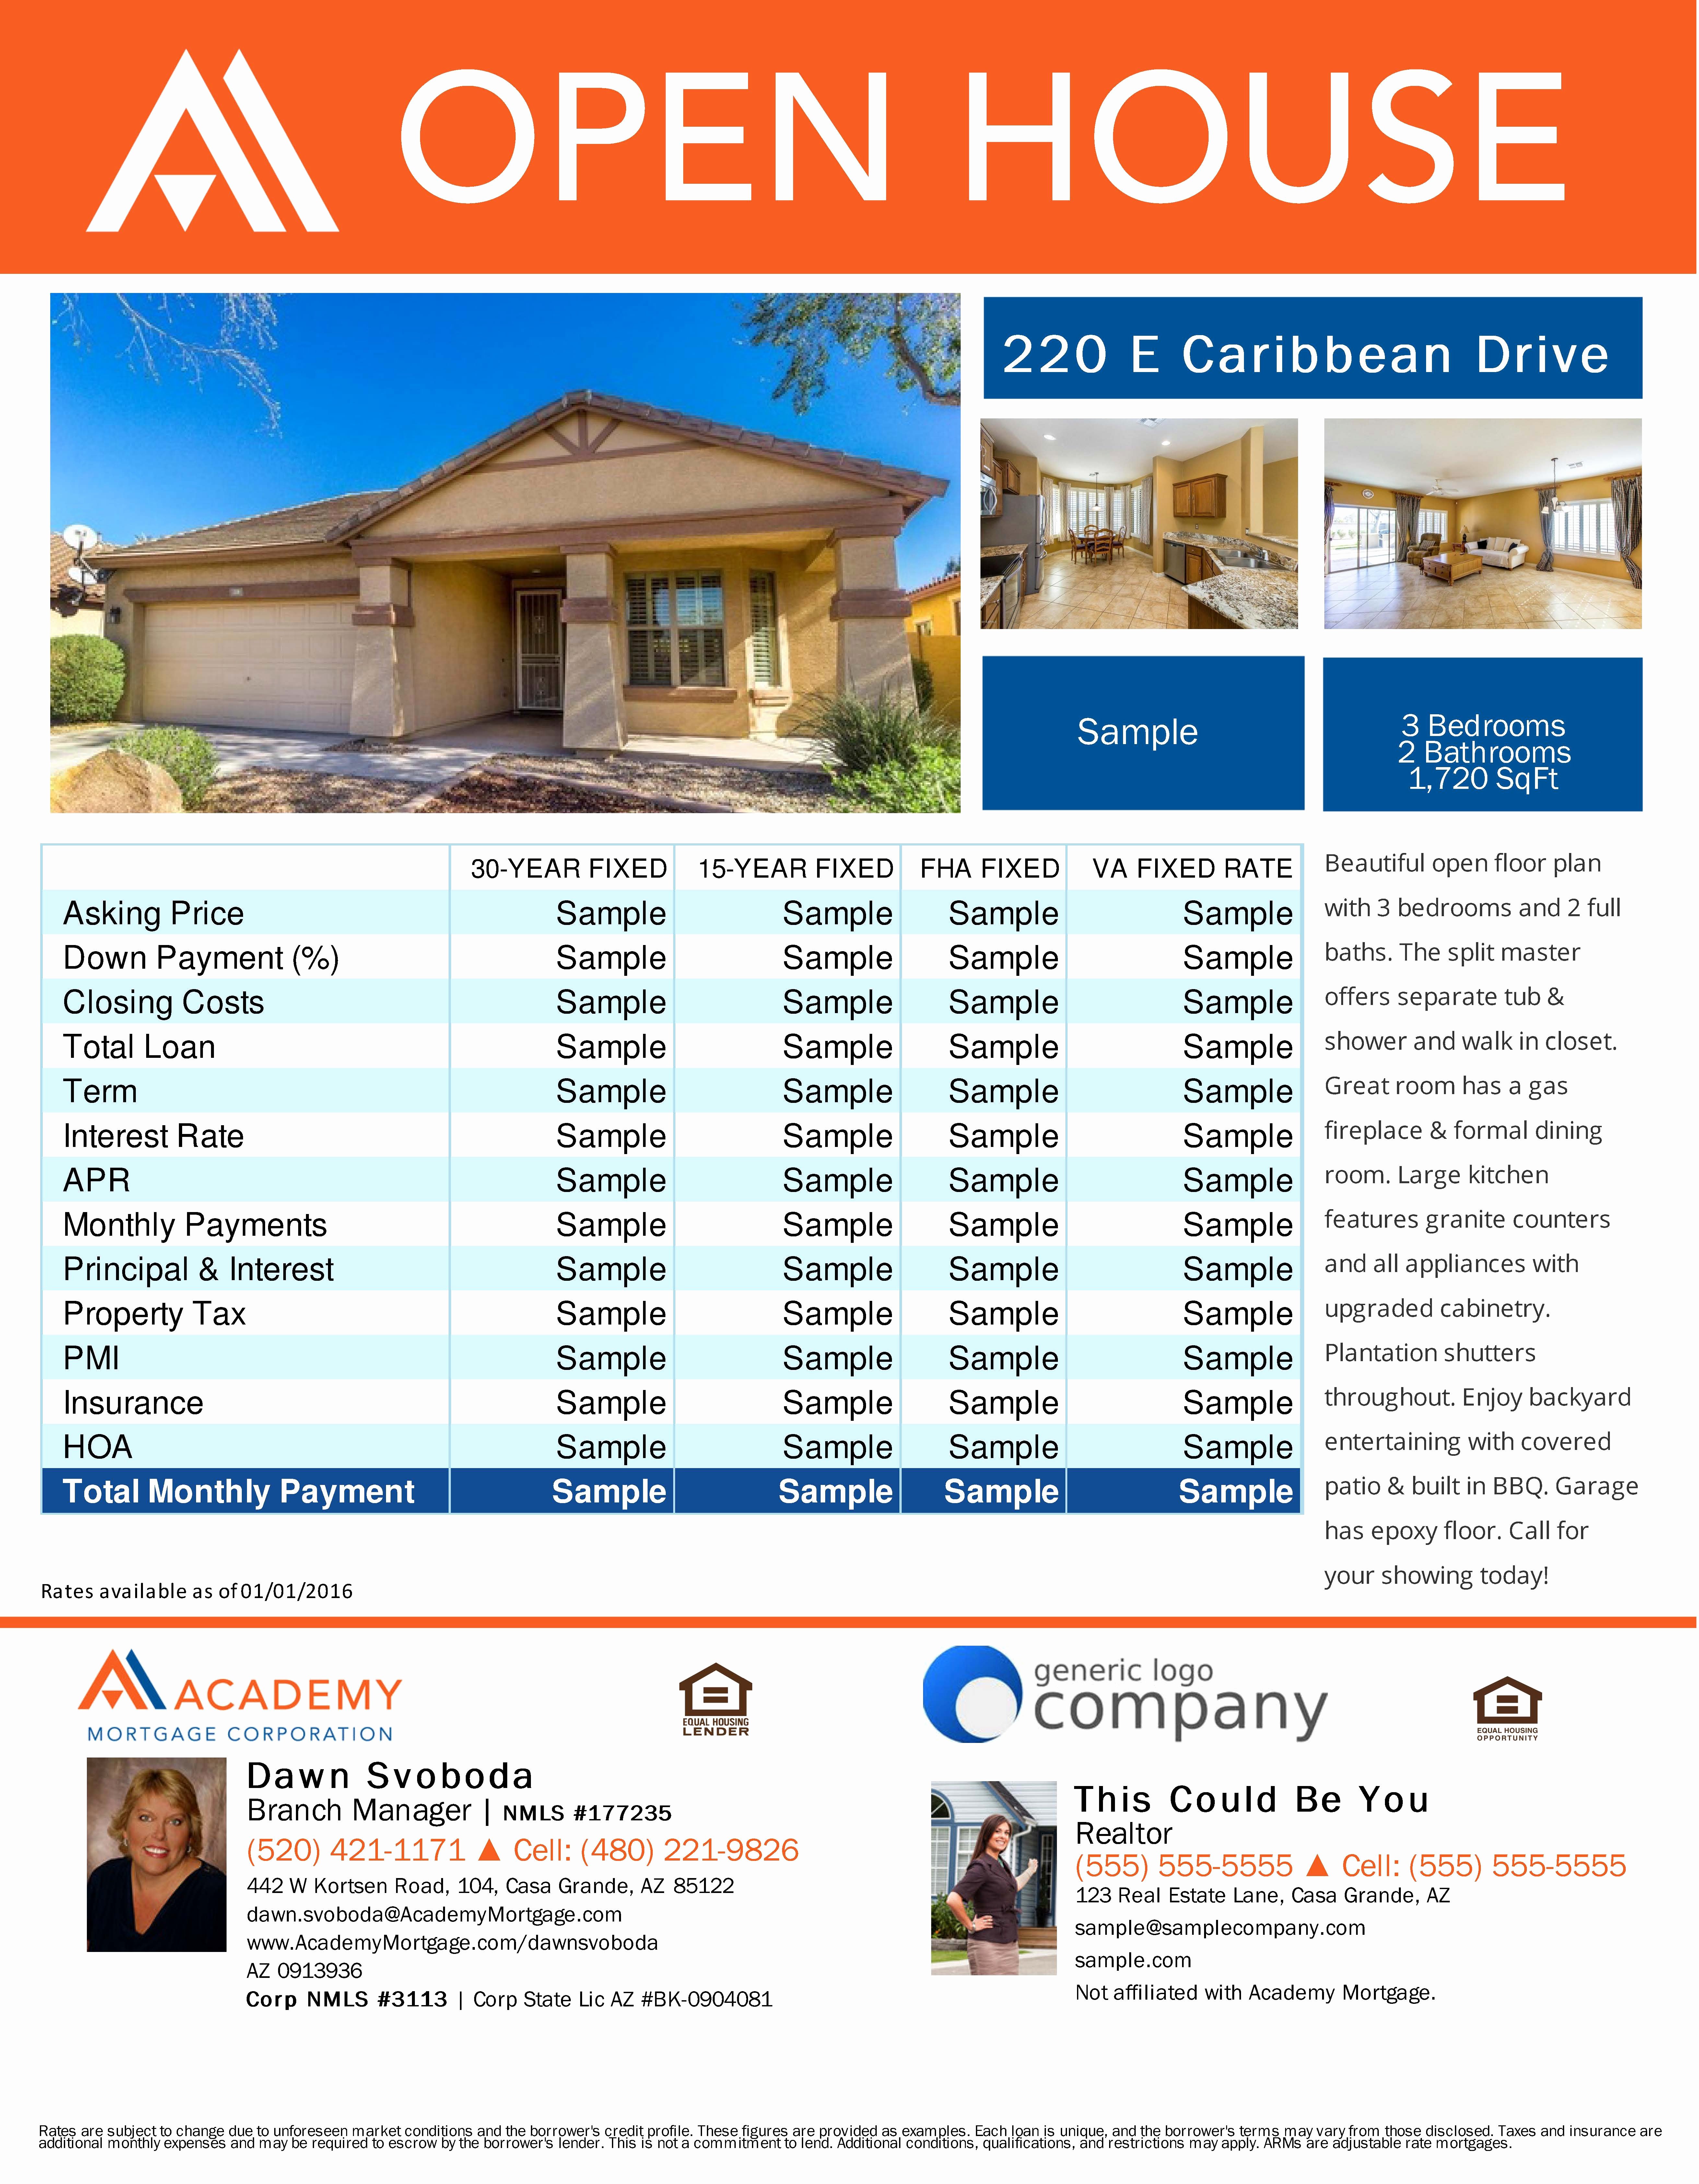 Open House Flyers Template Fresh Co Branded Property Flyer Open House Just Listed Just